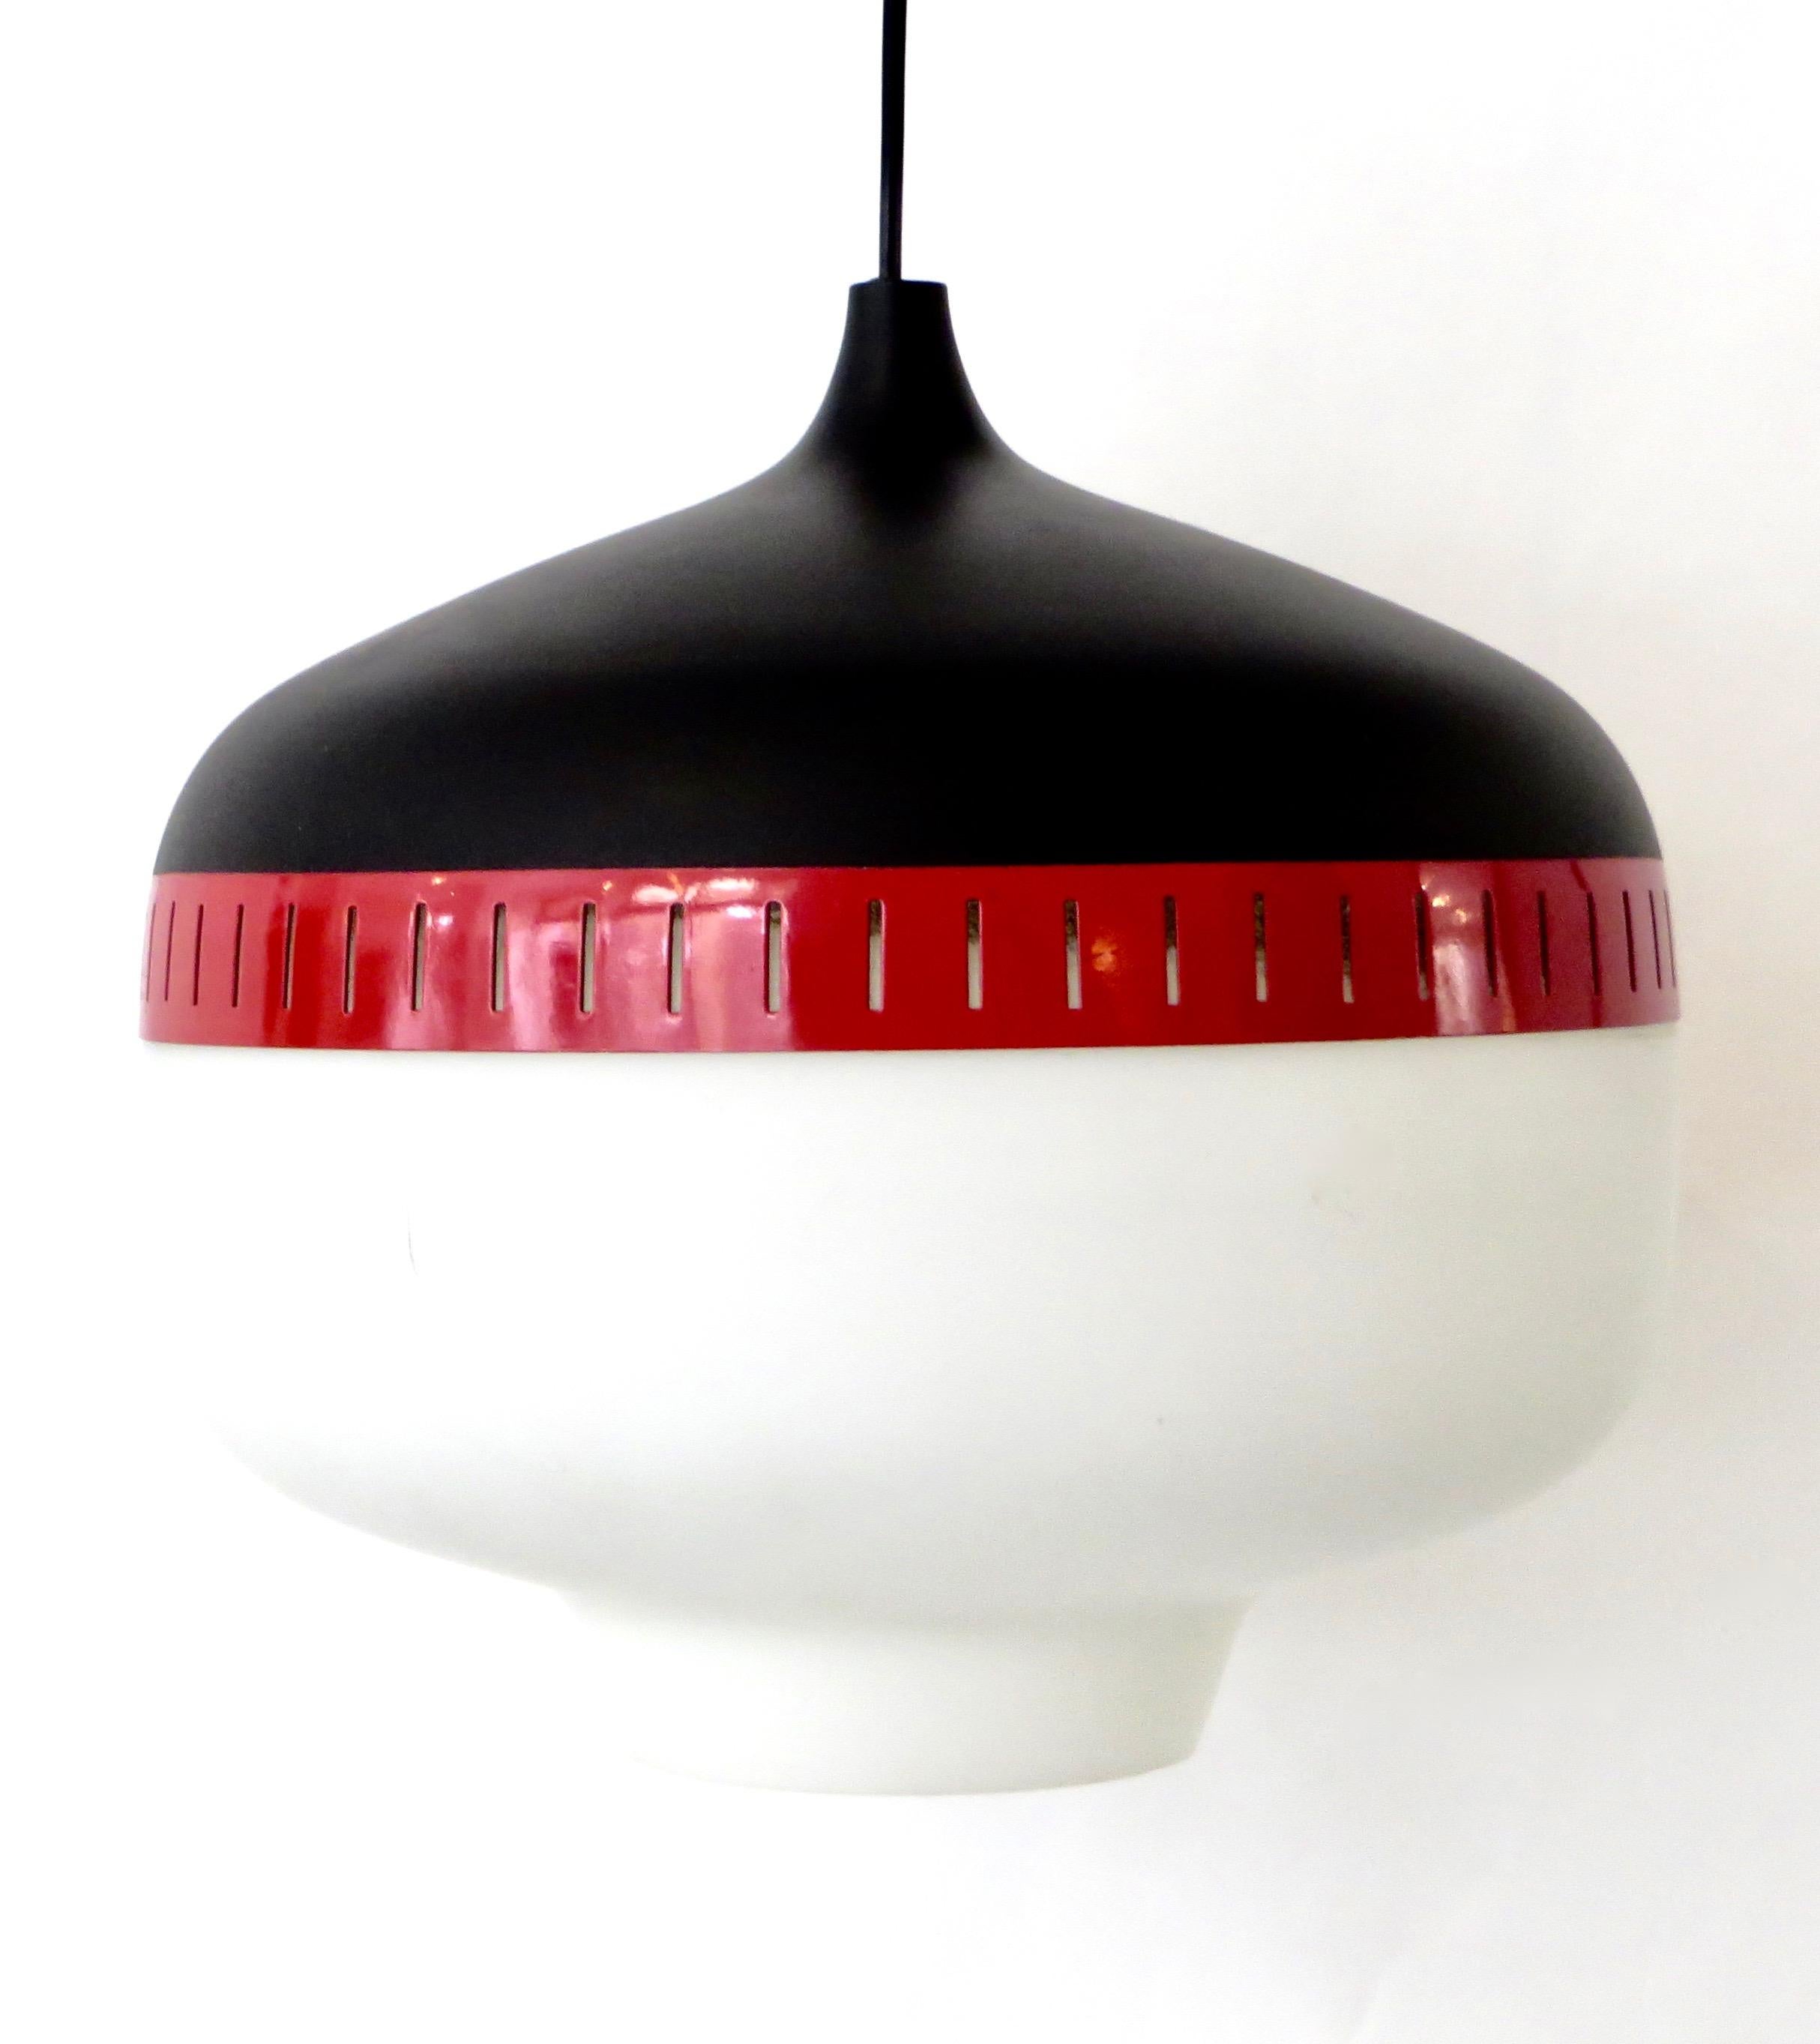 Pendant by Stilnovo designed and manufactured in Italy, circa 1960s.
Lacquered black and red metal shade with brushed satin opaque glass diffuser.
Perfect condition. Original ceiling cap.
Rewired for US junction boxes.
Takes one E27 100 w